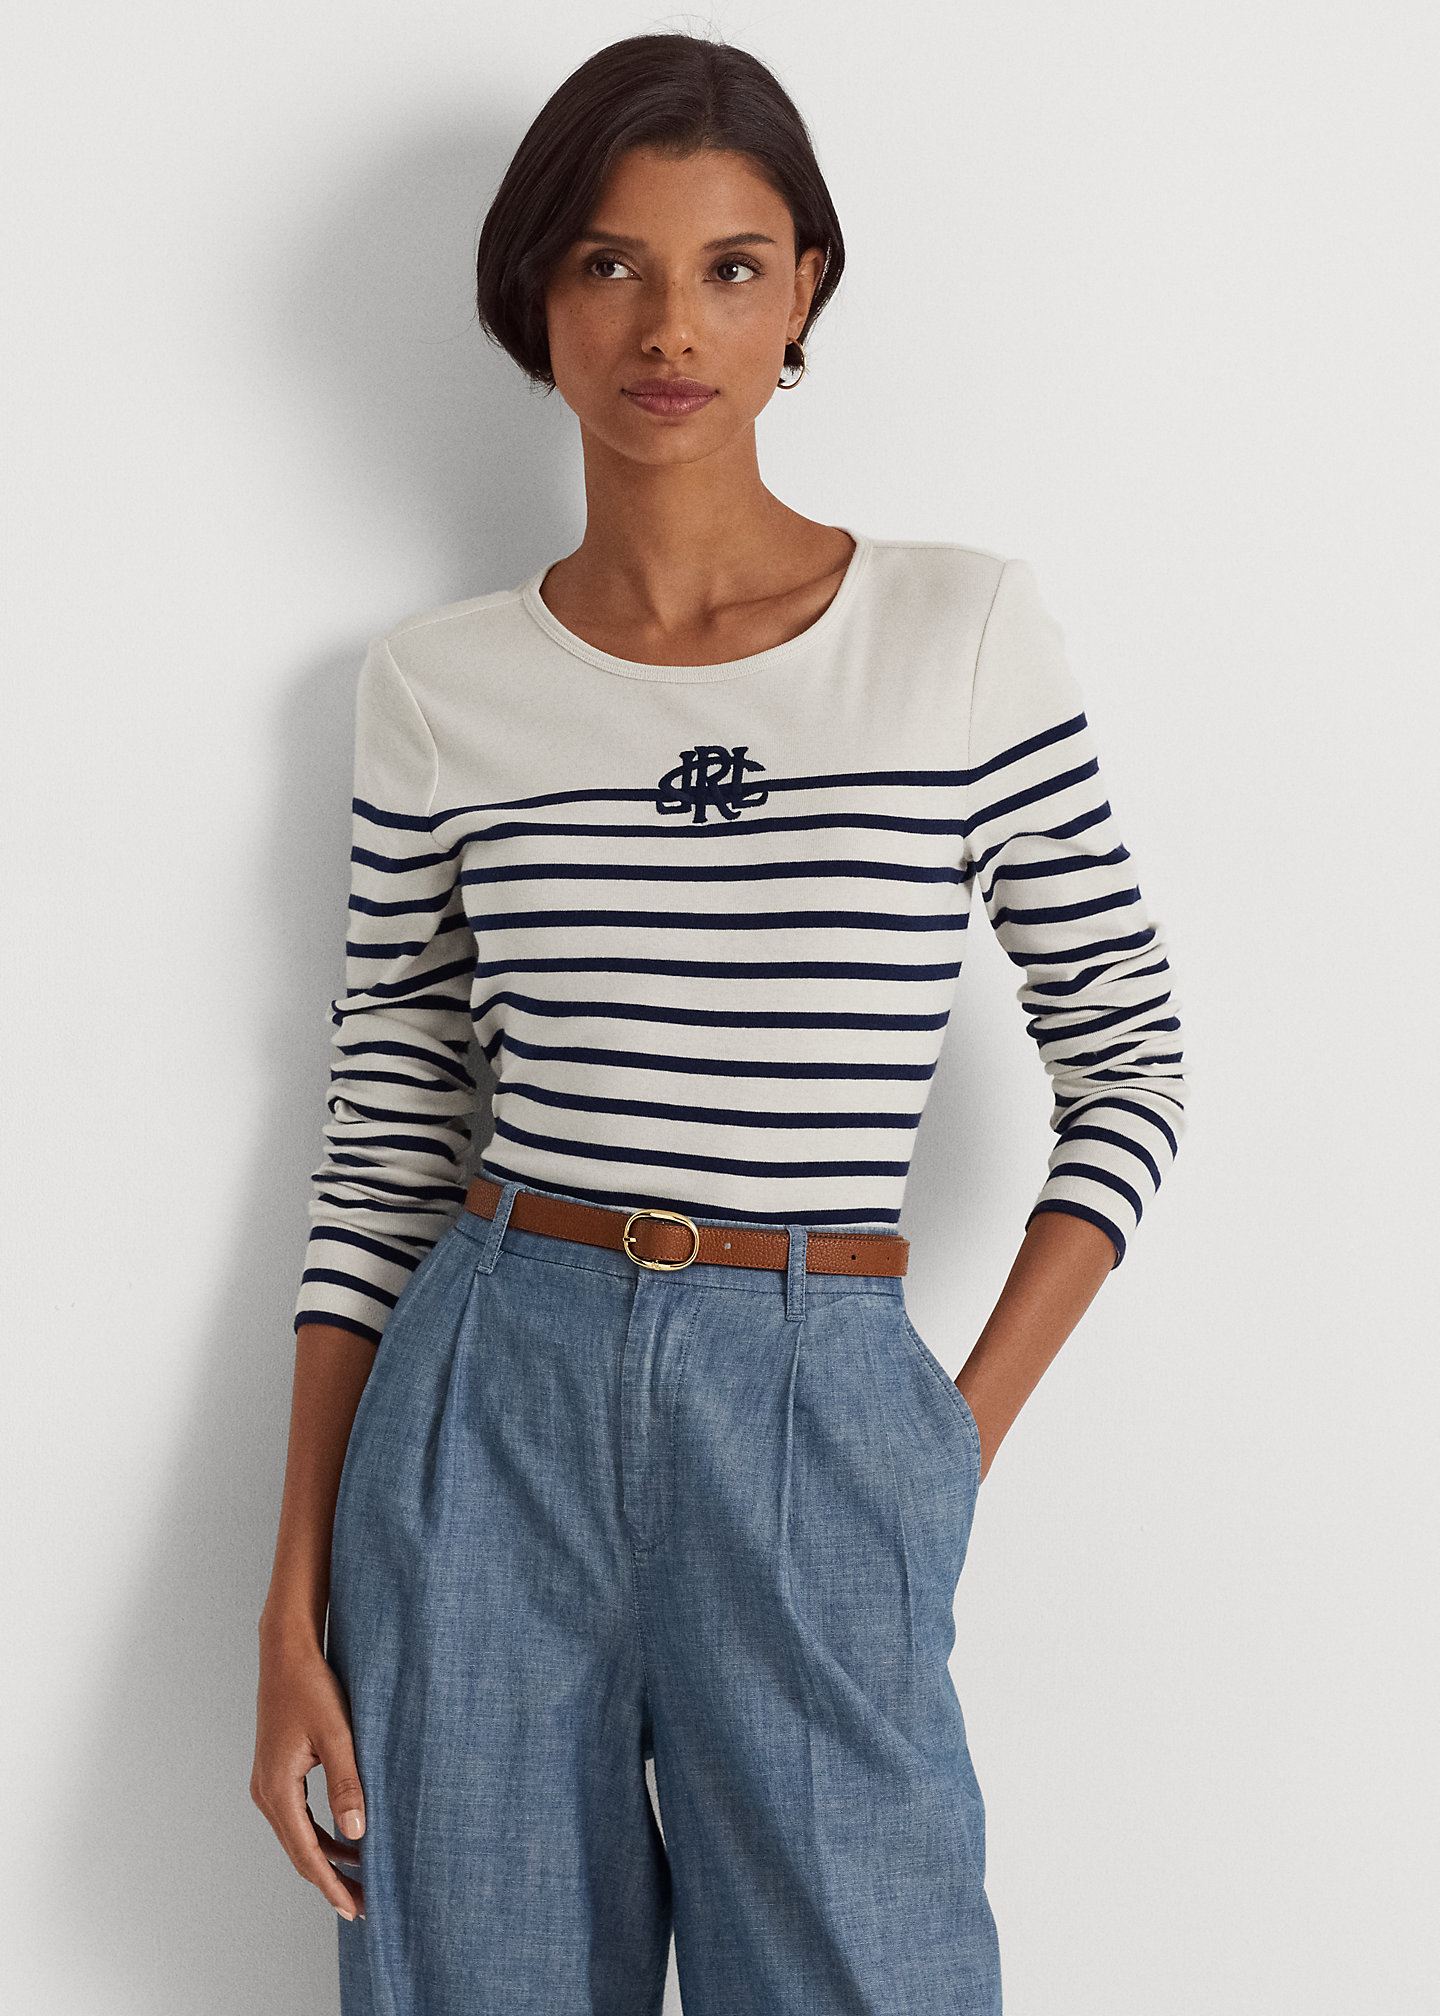 Striped Stretch Cotton Long-Sleeve Tee